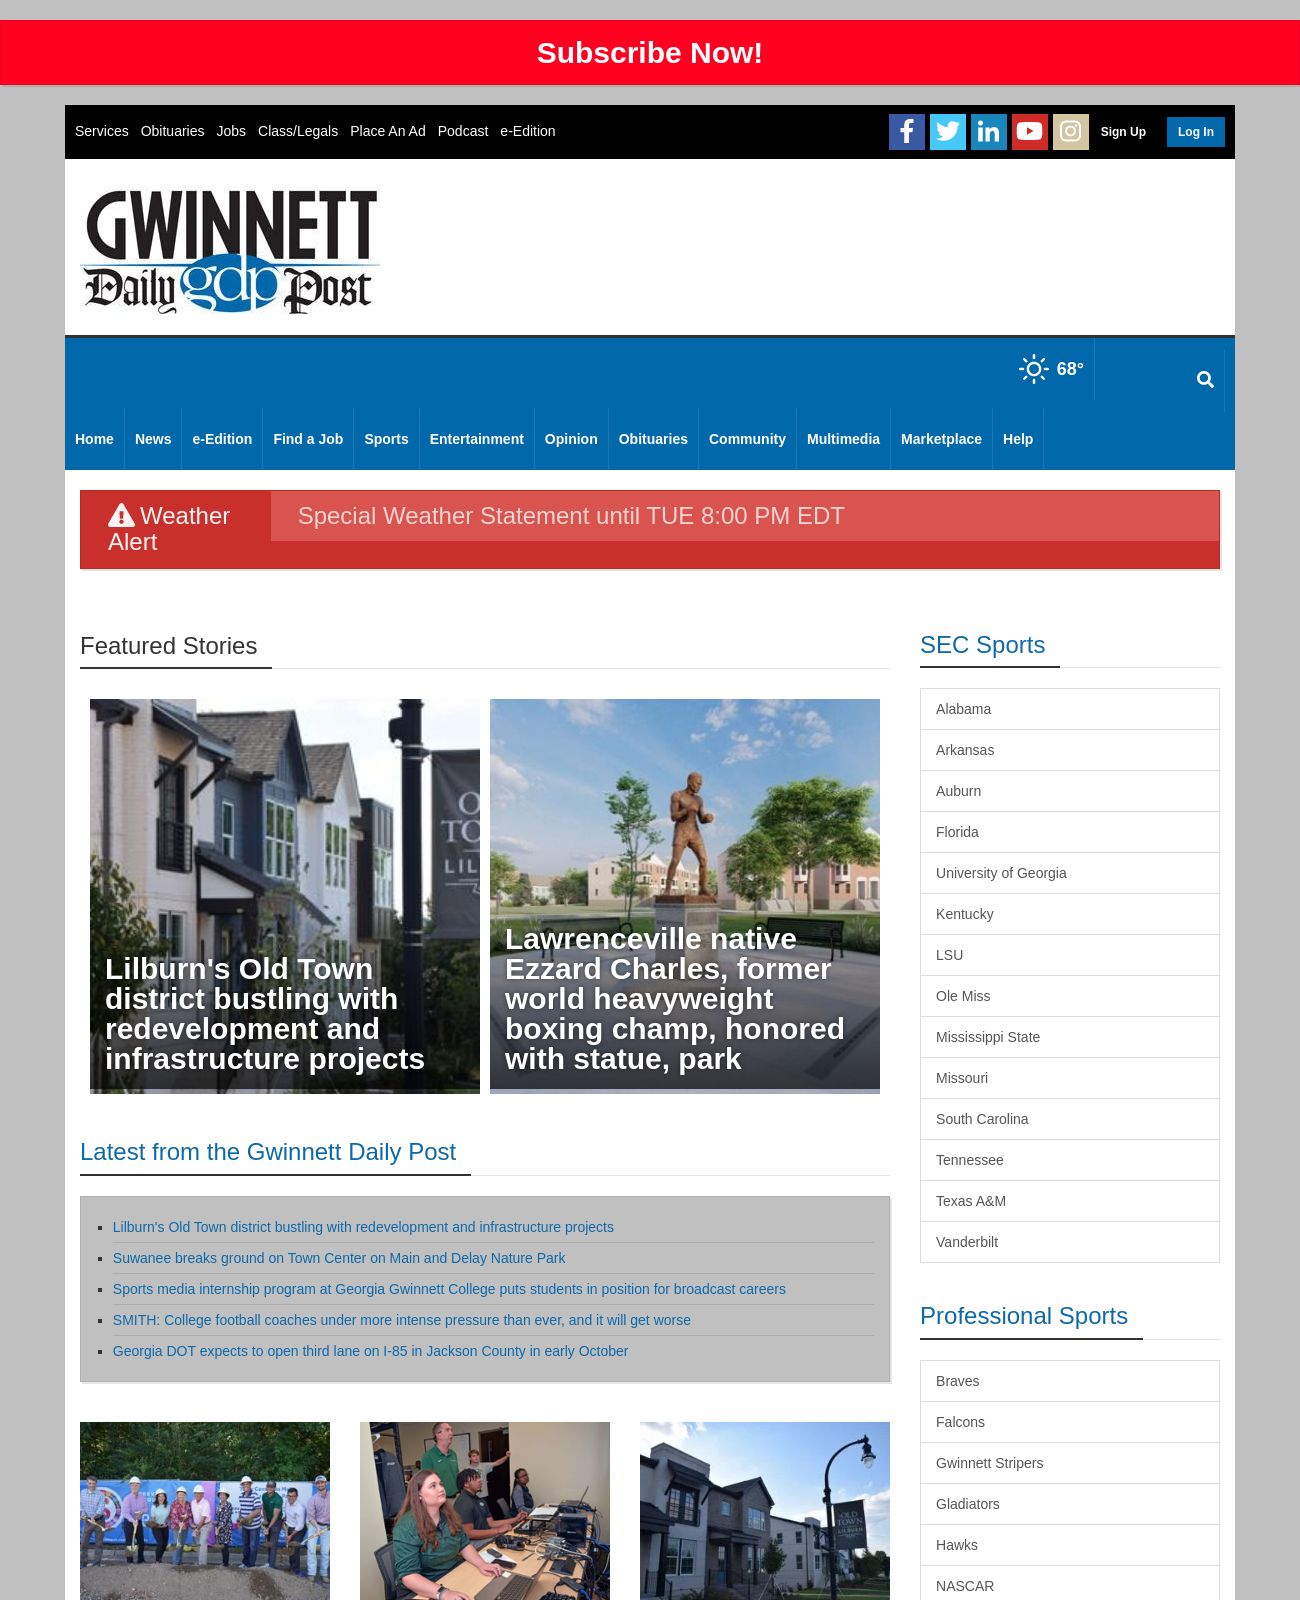 Gwinnett Daily Post at 2022-09-27 19:54:47-04:00 local time